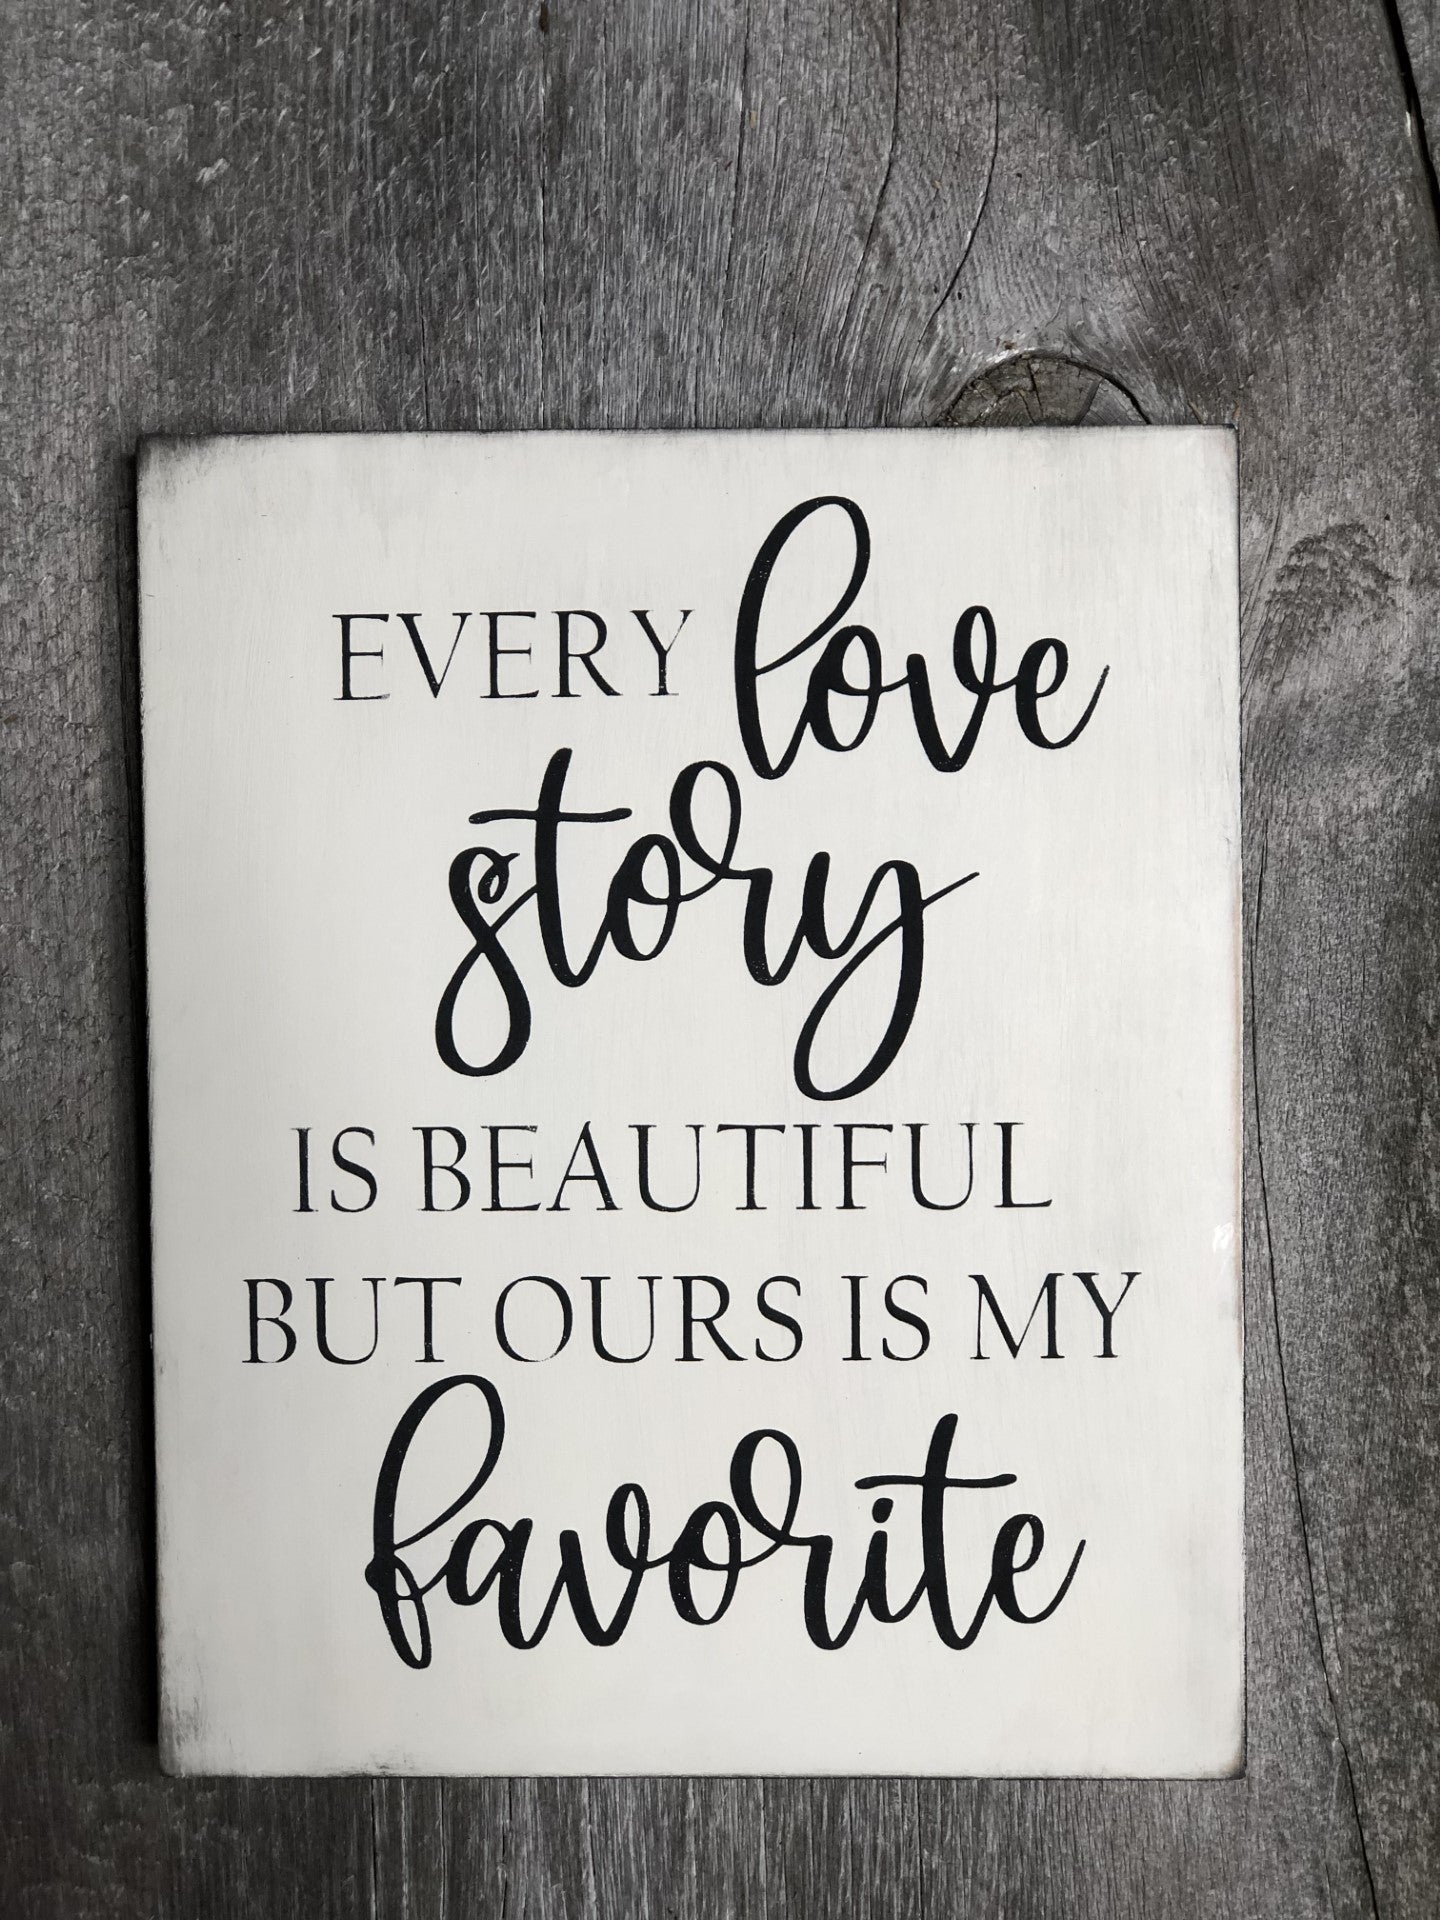 EVERY LOVE STORY IS BEAUTIFUL BUT OURS IS MY FAVORITE- WOOD SIGN